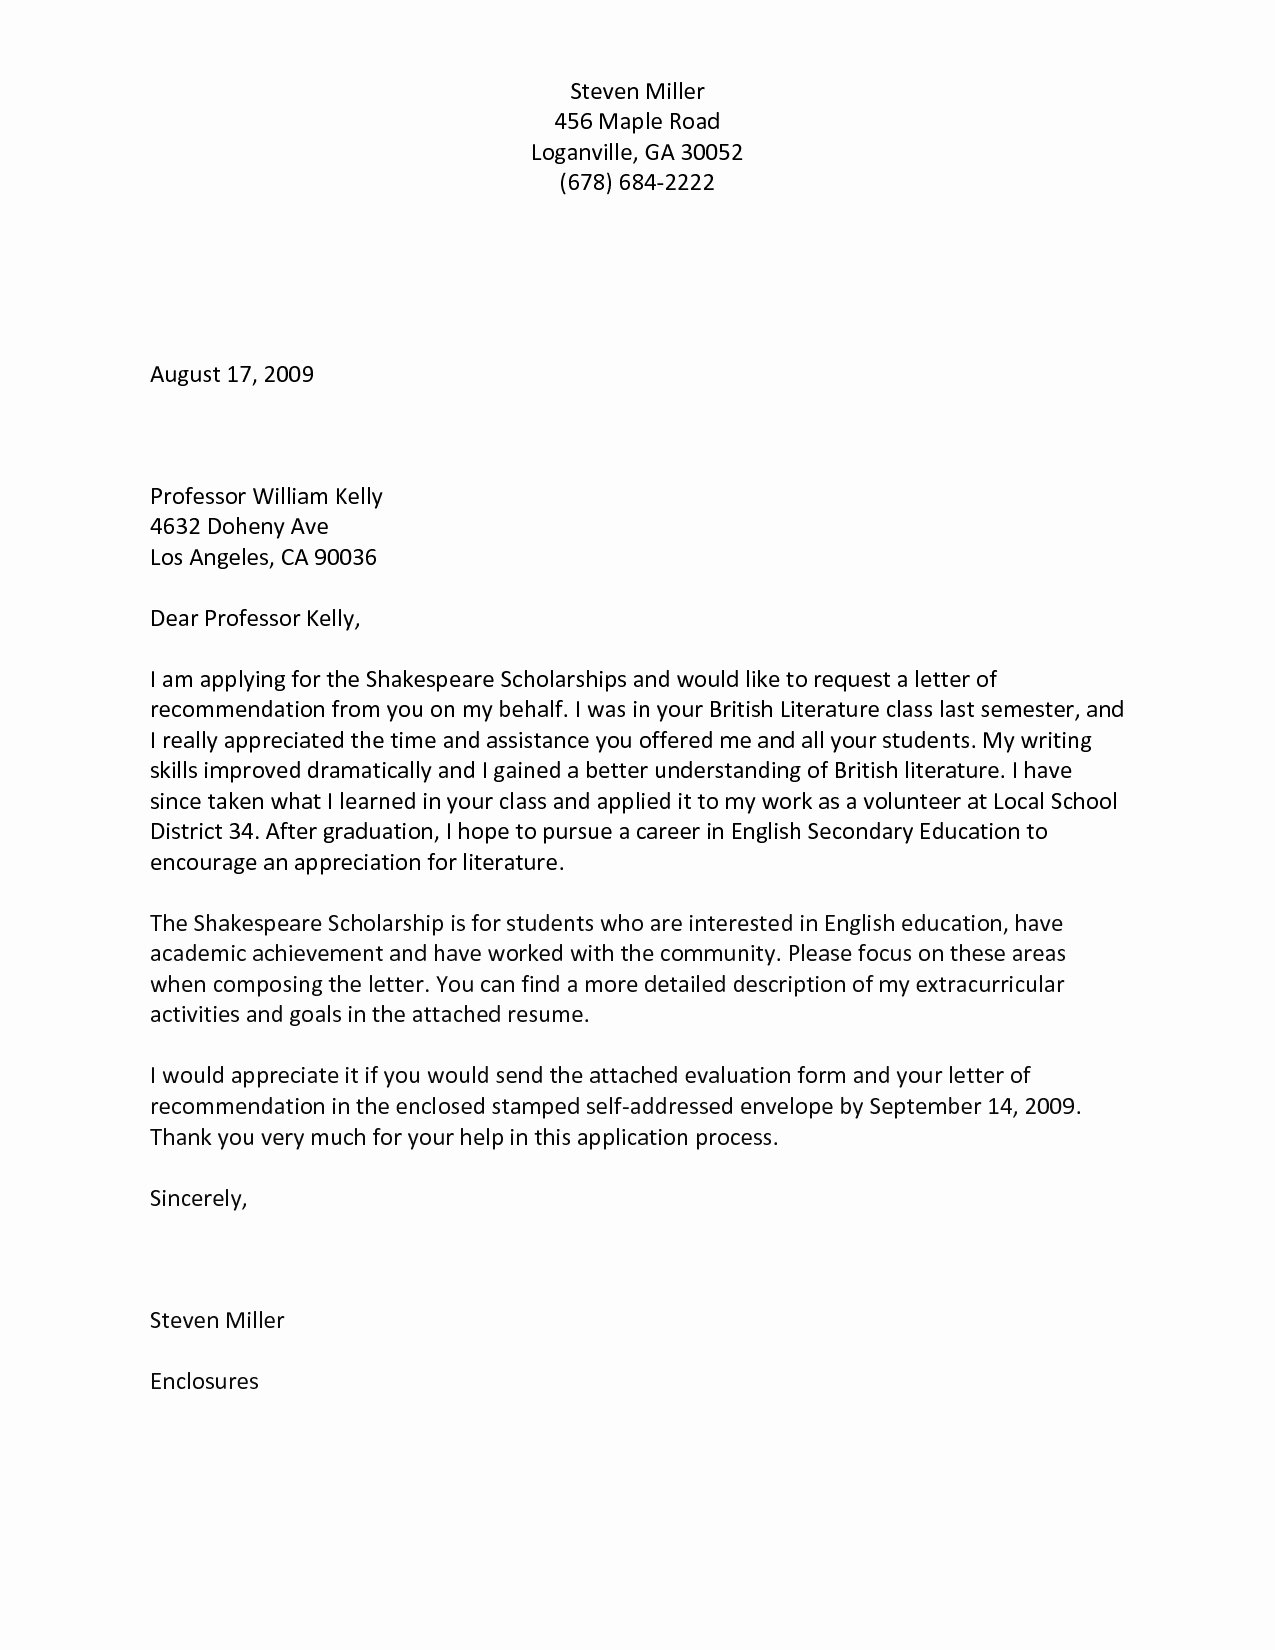 Letter Of Recommendation Request Lovely Letter Re Mendation Request Template Examples